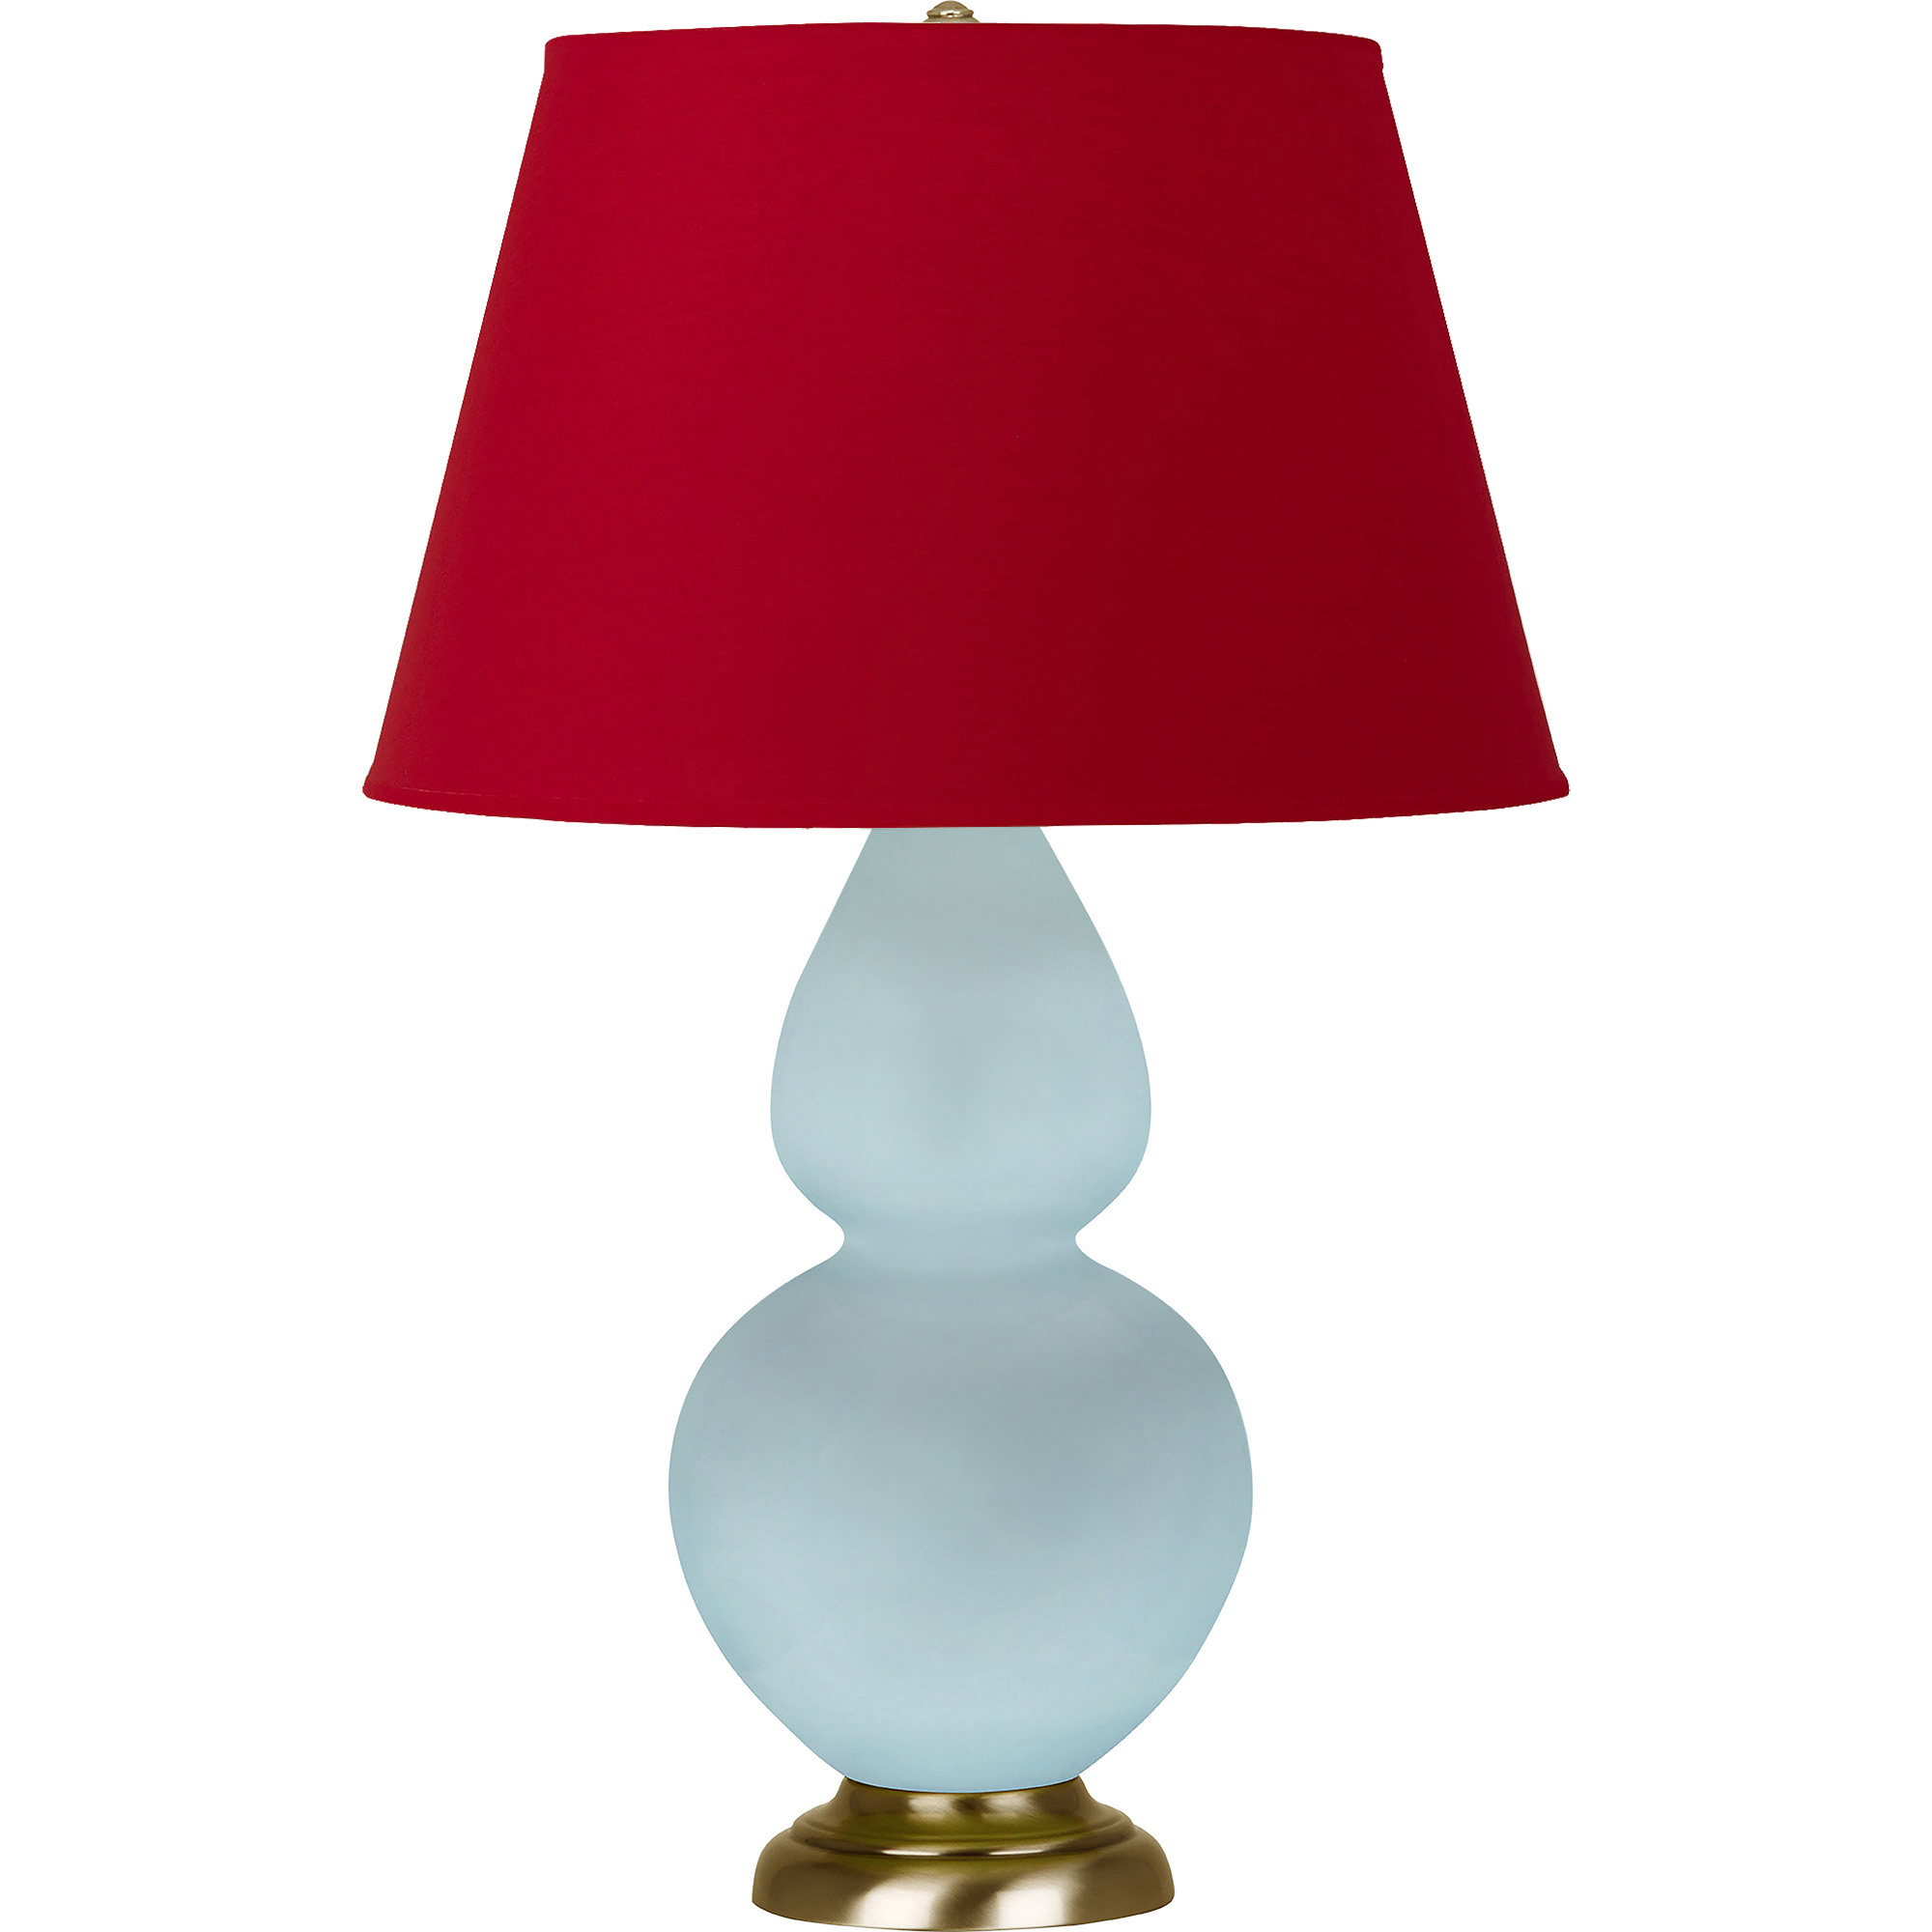 Double Gourd Table Lamp Style #1666R